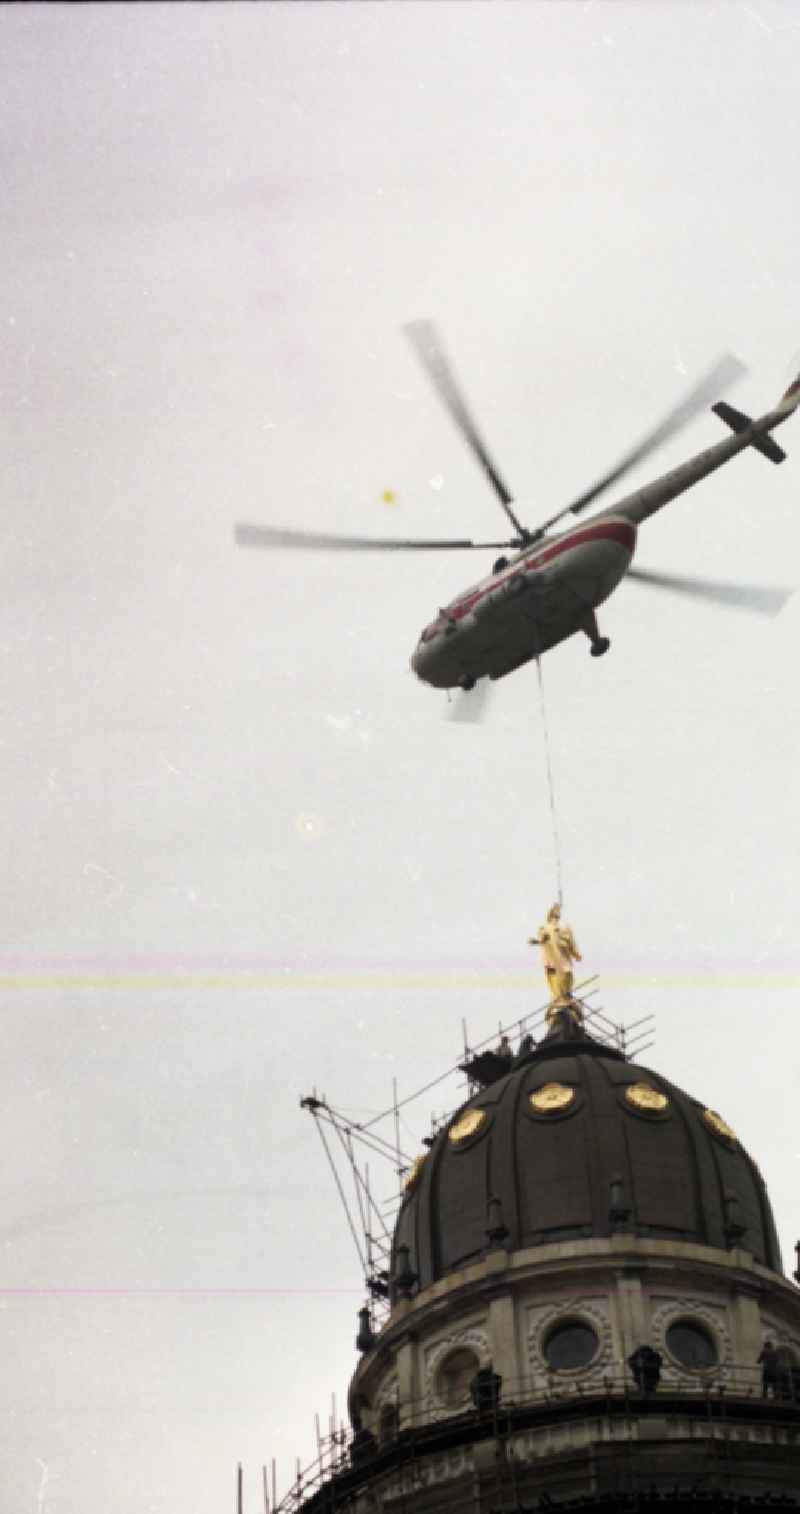 Special operation of an INTERFLUG - crane flight operation - Mi-8 helicopter to fly in the dome figure of the German Cathedral on Gendarmenmarkt in the district of Mitte in Berlin East Berlin on the territory of the former GDR, German Democratic Republic